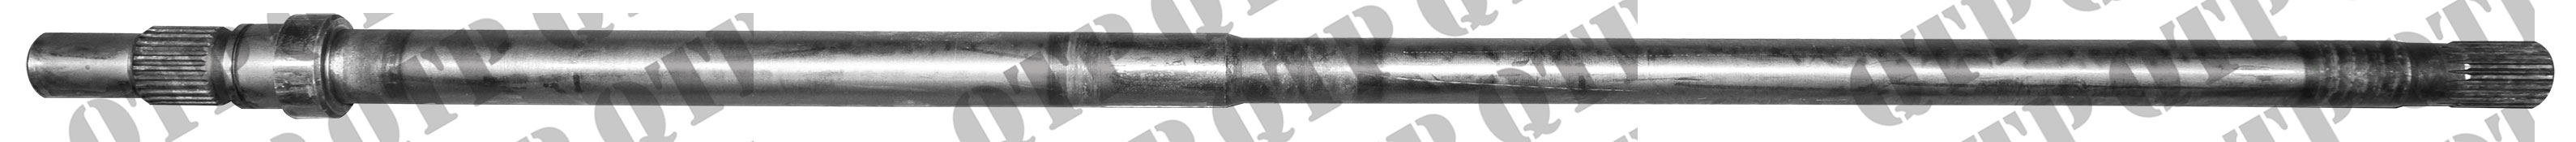 PTO Shaft Ford Constant Mesh 5000 - 7000